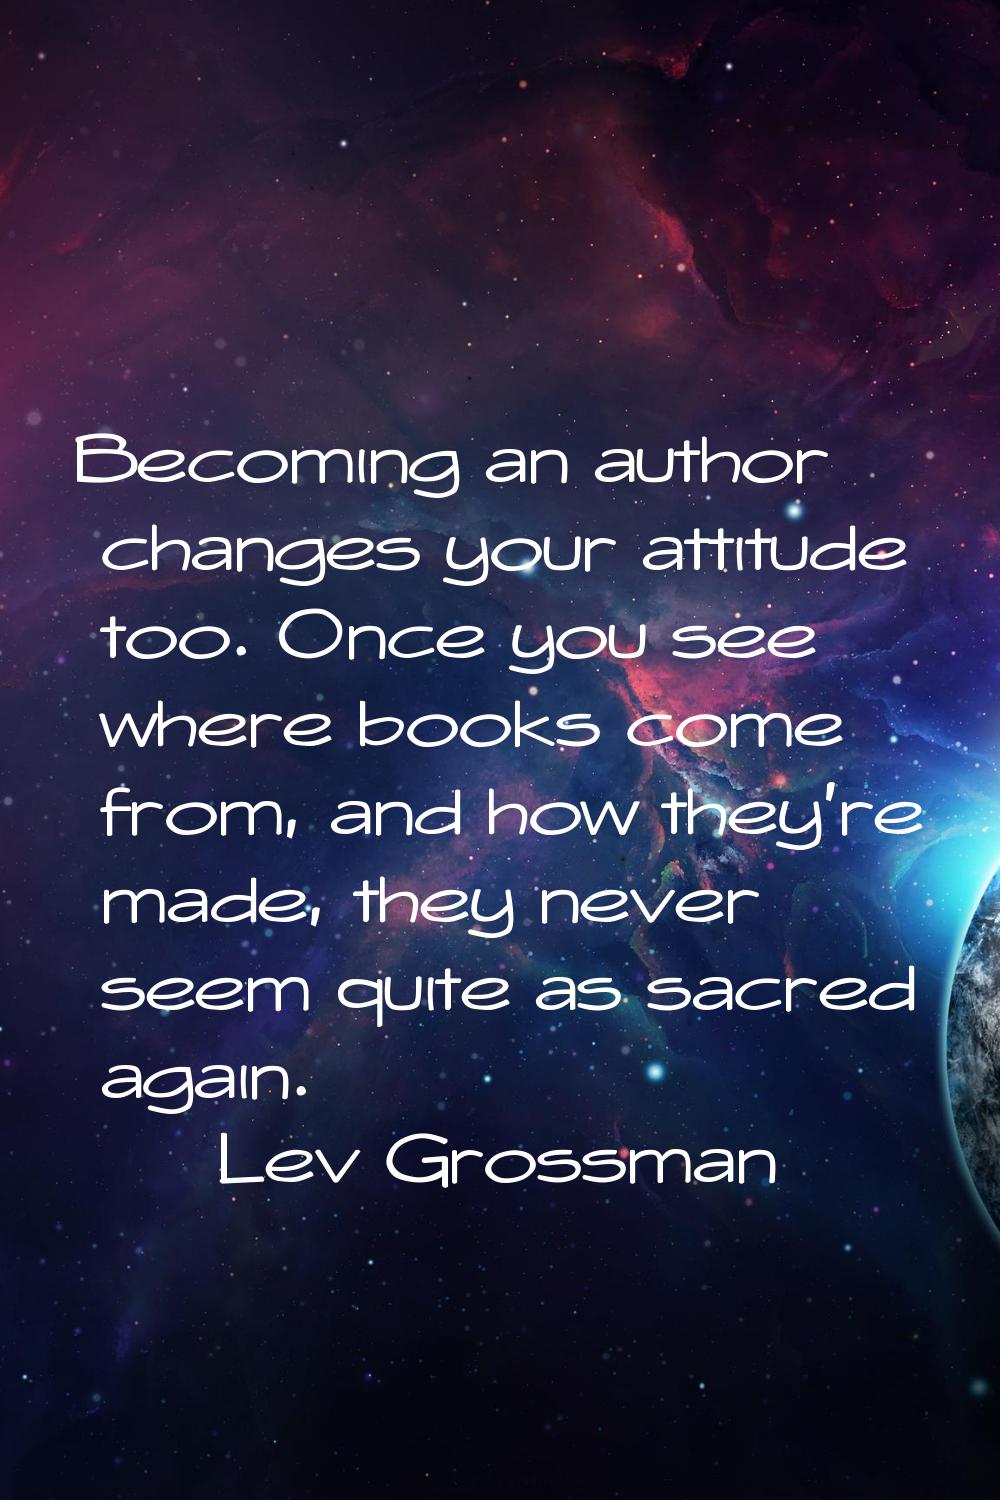 Becoming an author changes your attitude too. Once you see where books come from, and how they're m